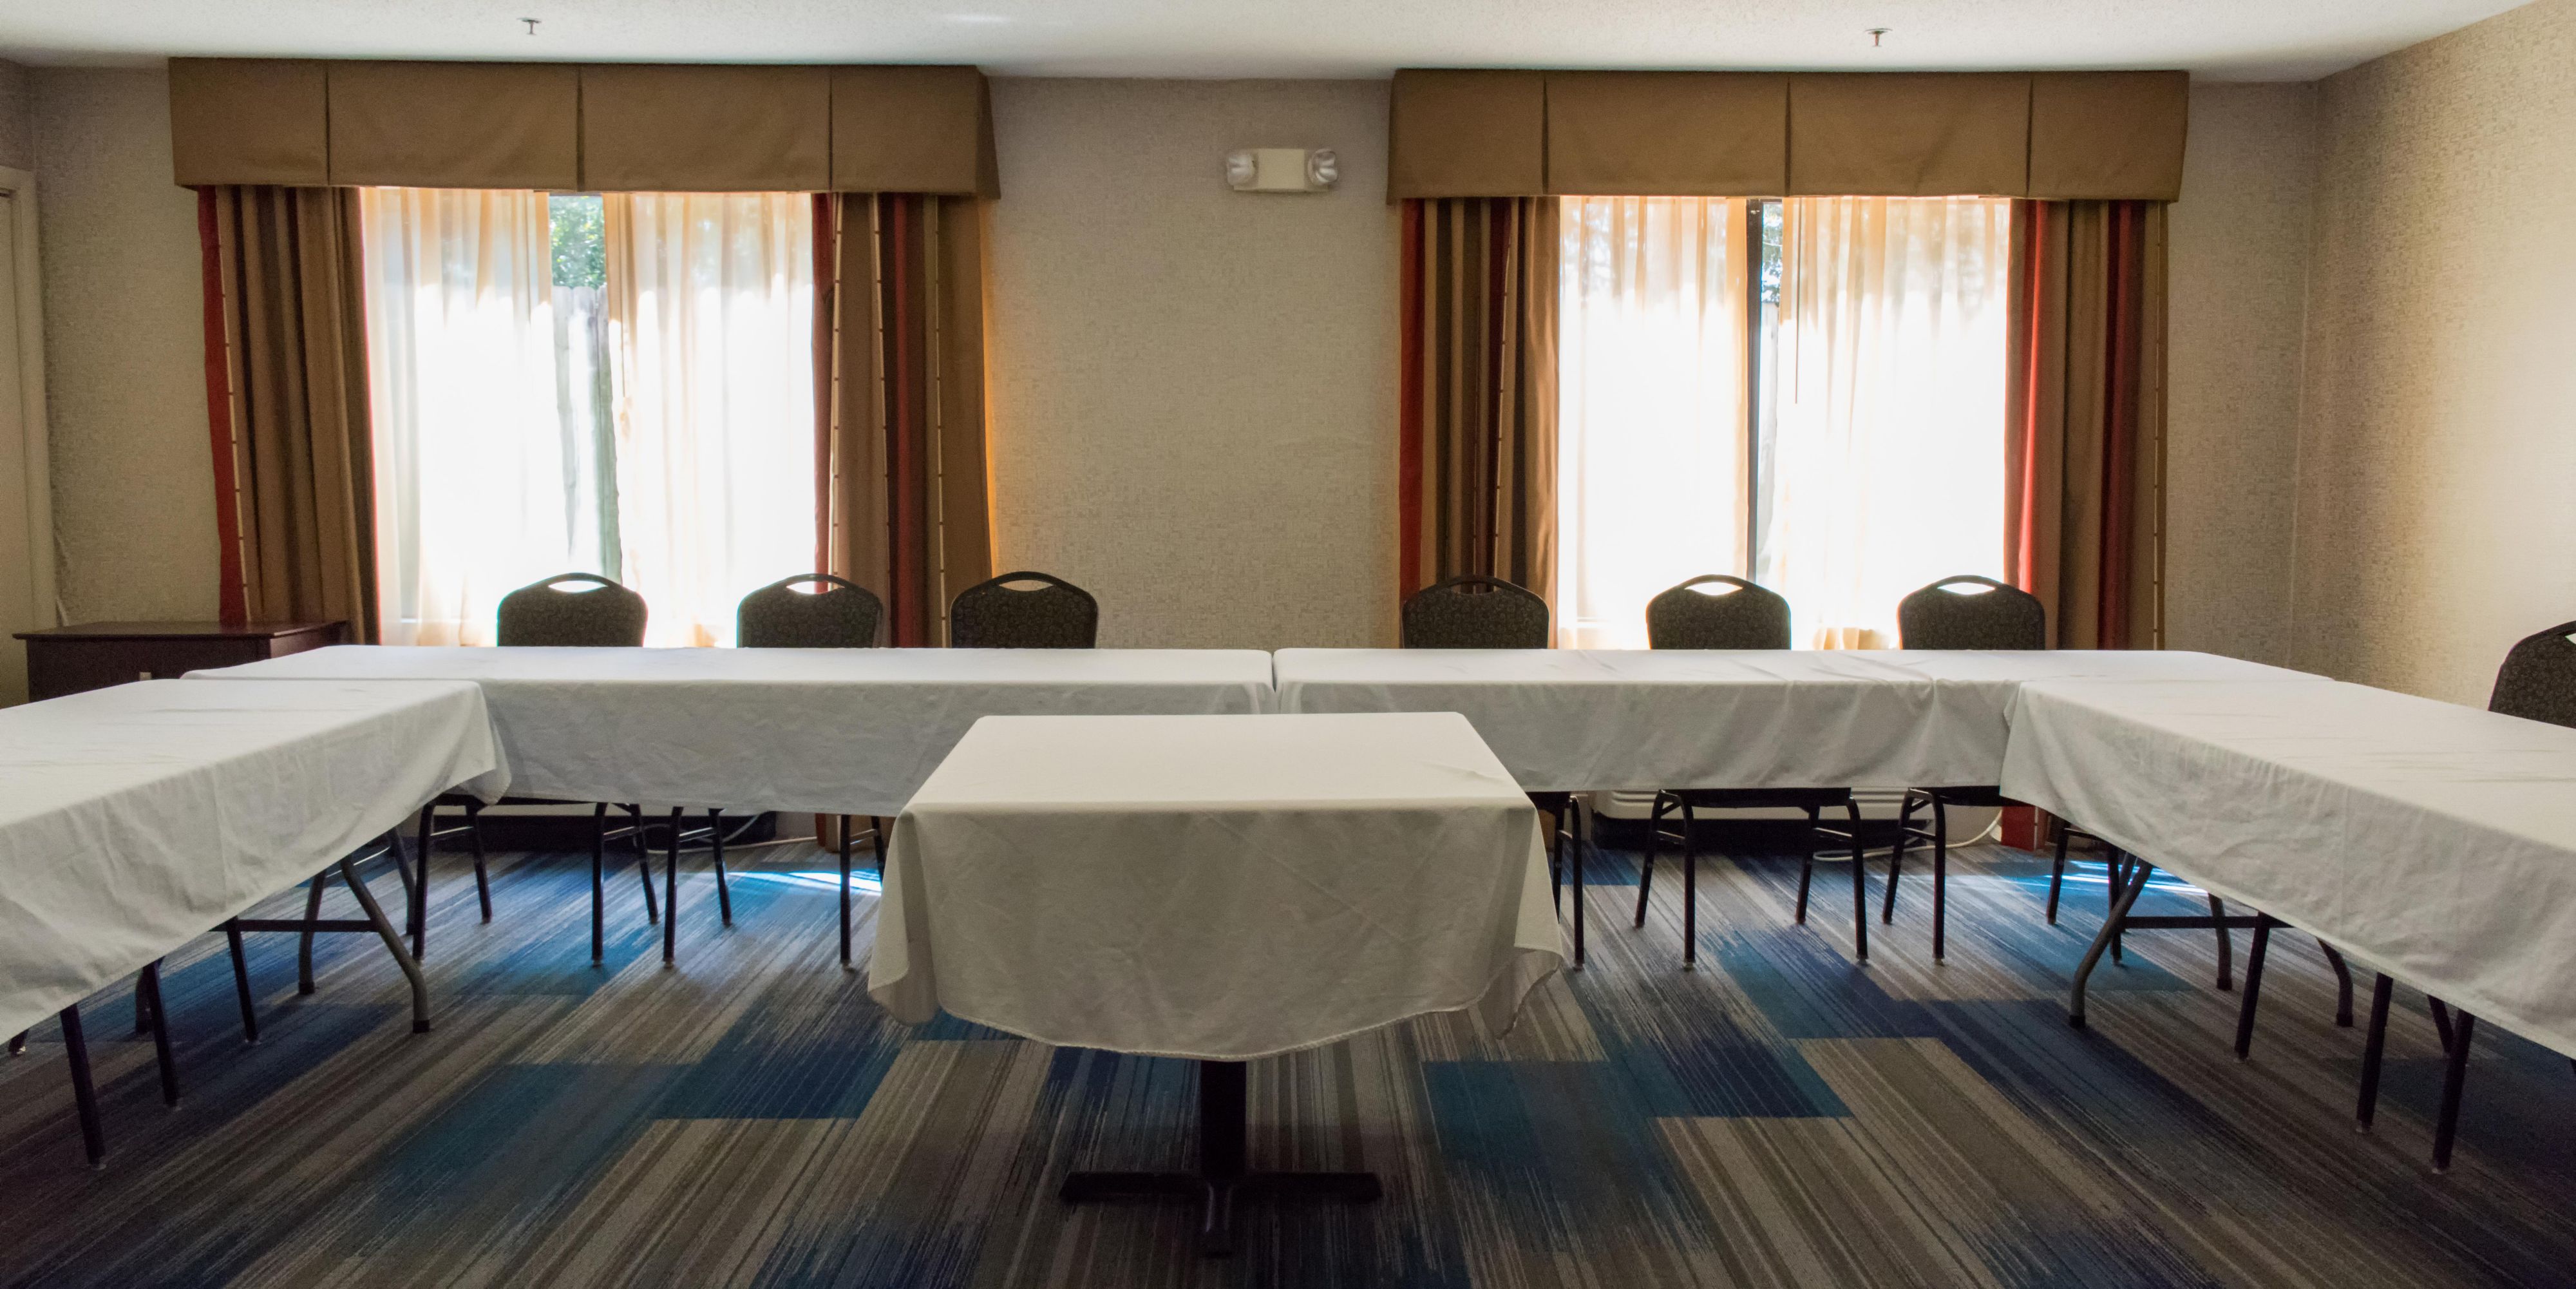 Do you need a change of scenery from your home or work office? We have a newly-renovated 625 square foot meeting room on site that can accommodate up to 30 people. Enjoy complimentary coffee and tea while you are here!